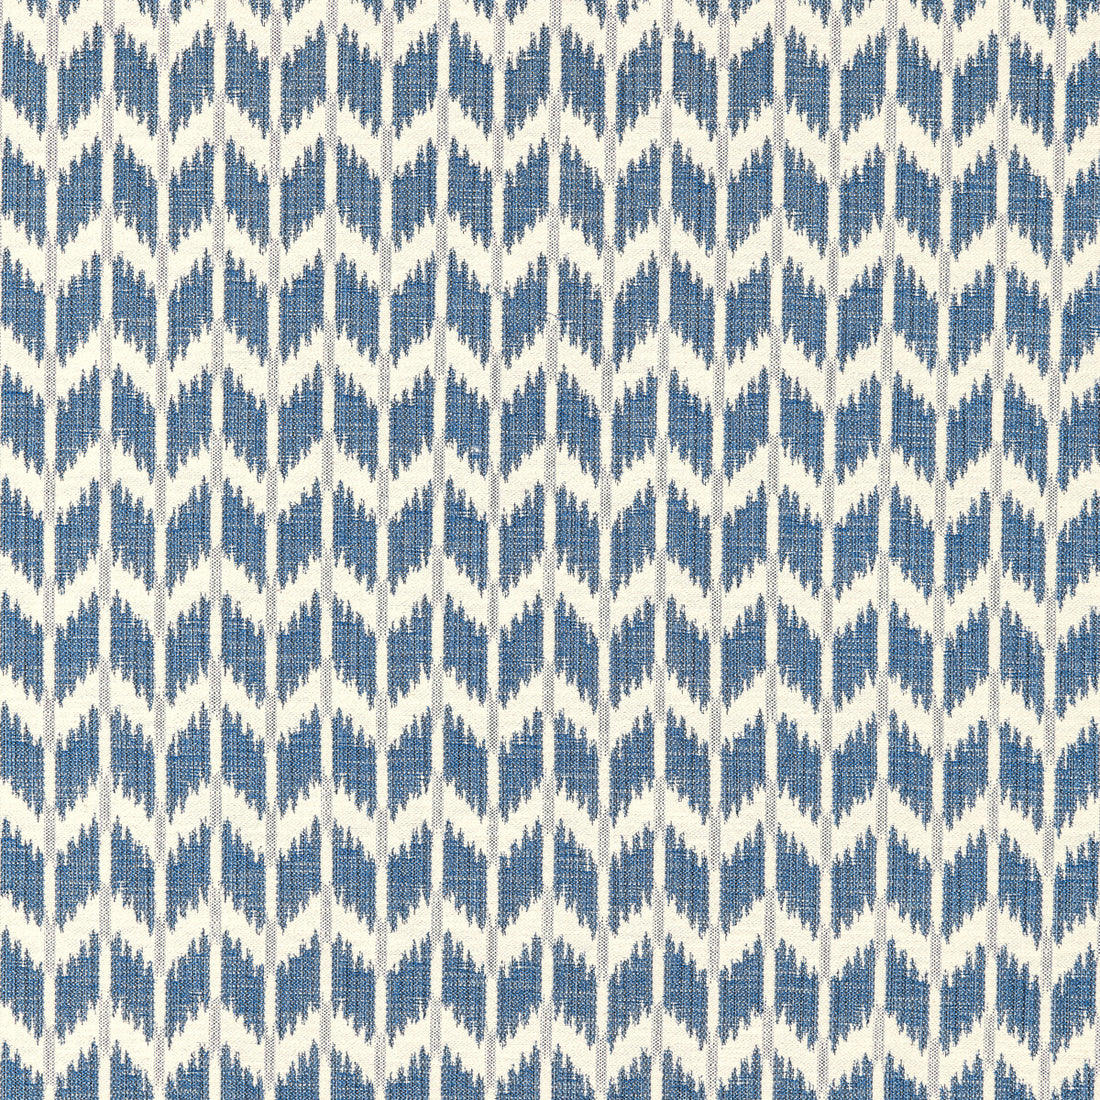 Lorient Weave fabric in blue color - pattern 8022111.5.0 - by Brunschwig &amp; Fils in the Lorient Weaves collection